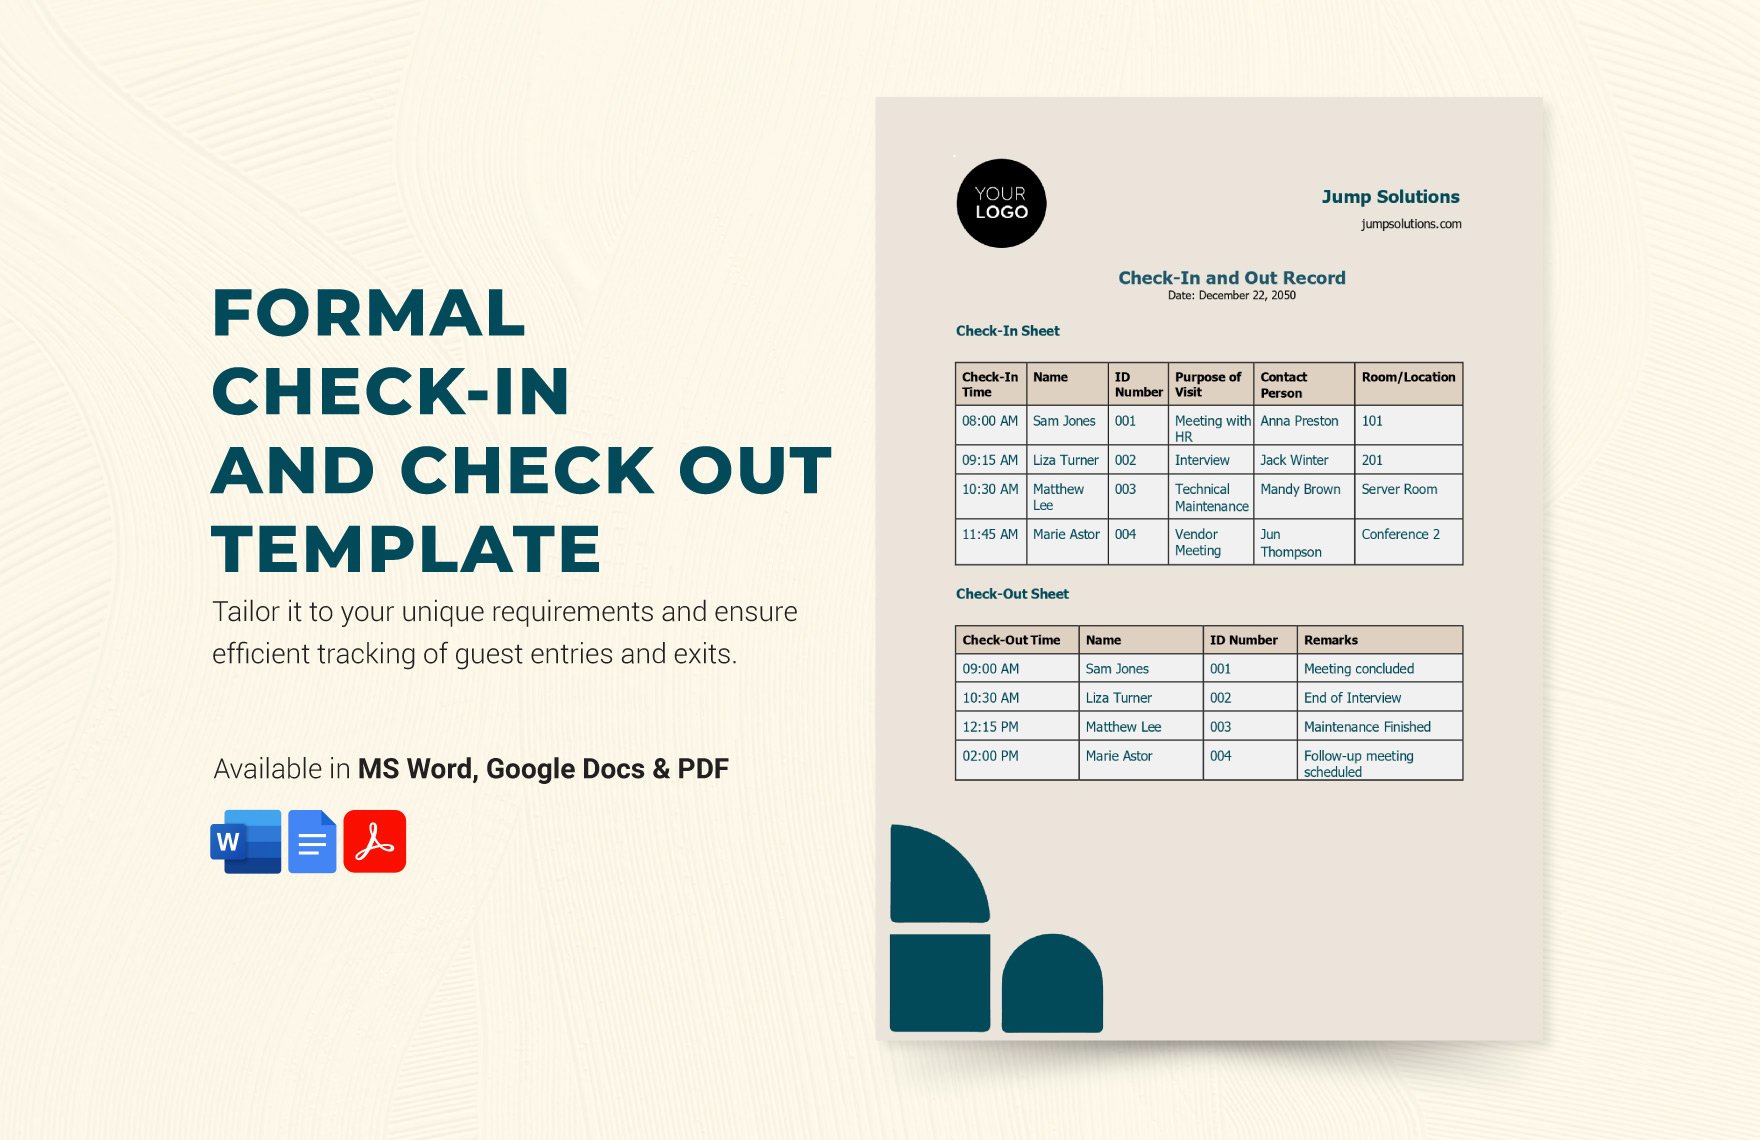 Formal Check-in and Out Template